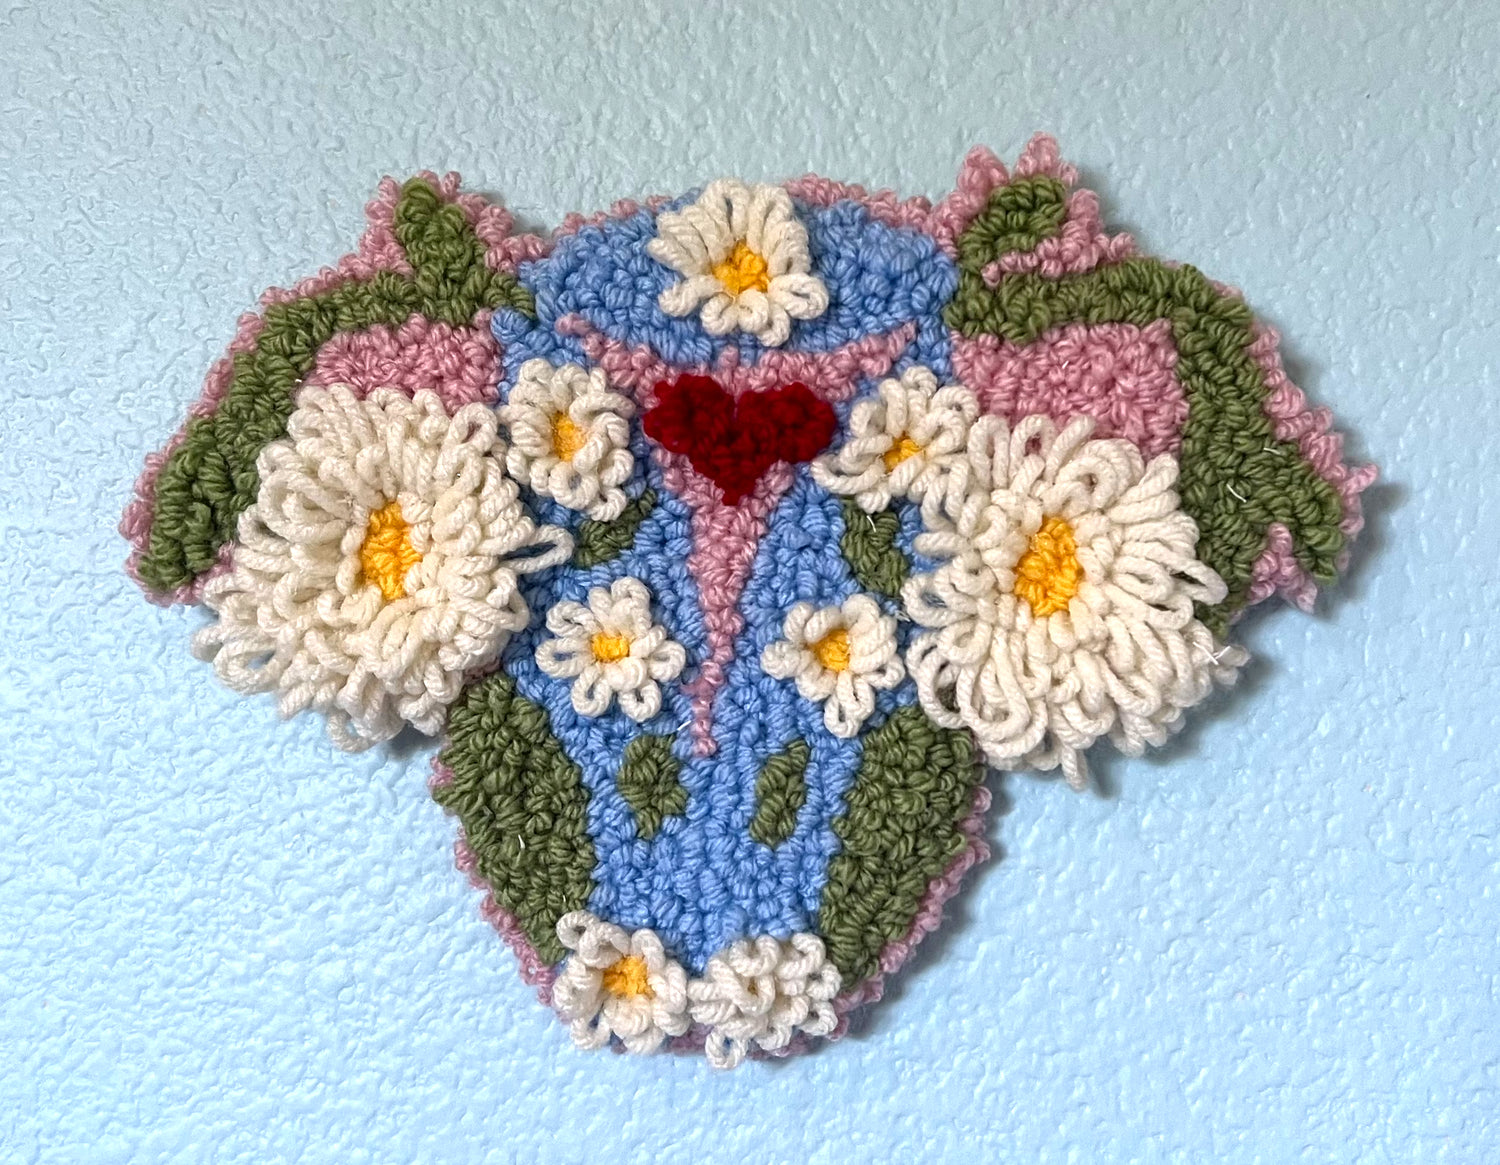 tufted wall wall hanging of a uterus made up of flowers and plants